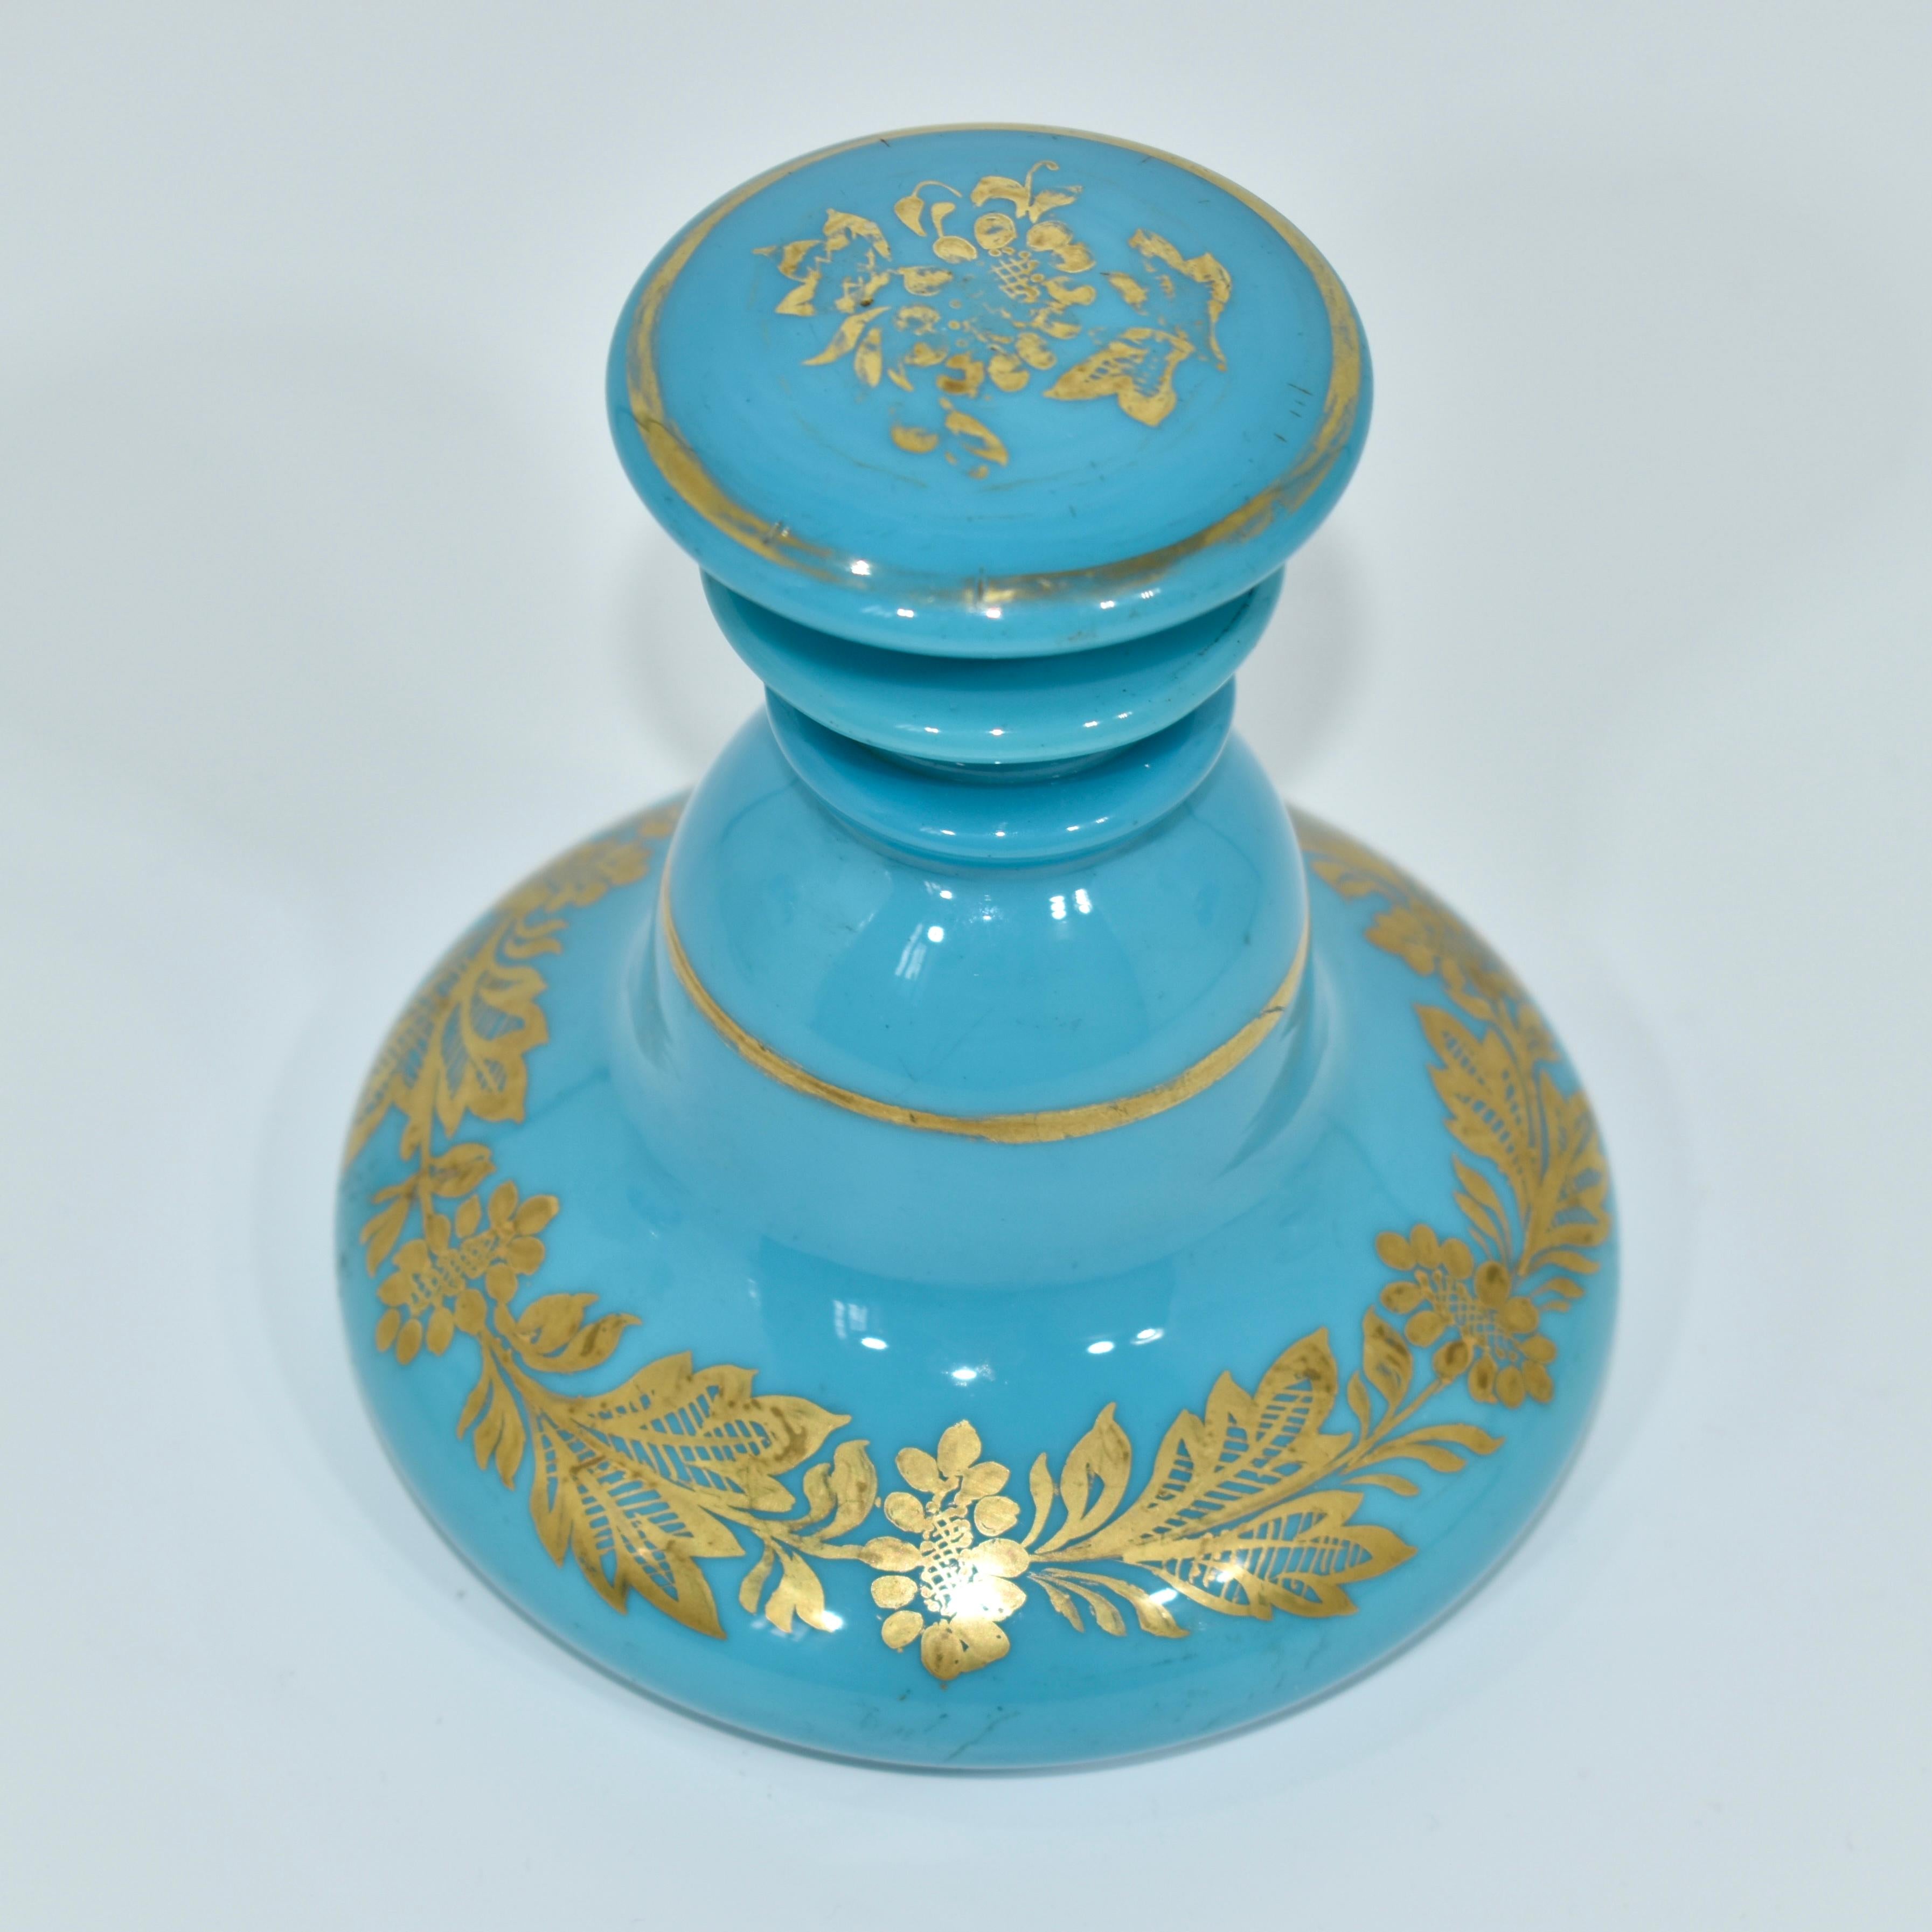 Antique Blue Opaline Glass Perfume Bottle, Flacon, Charles X, 19th Century In Good Condition For Sale In Rostock, MV